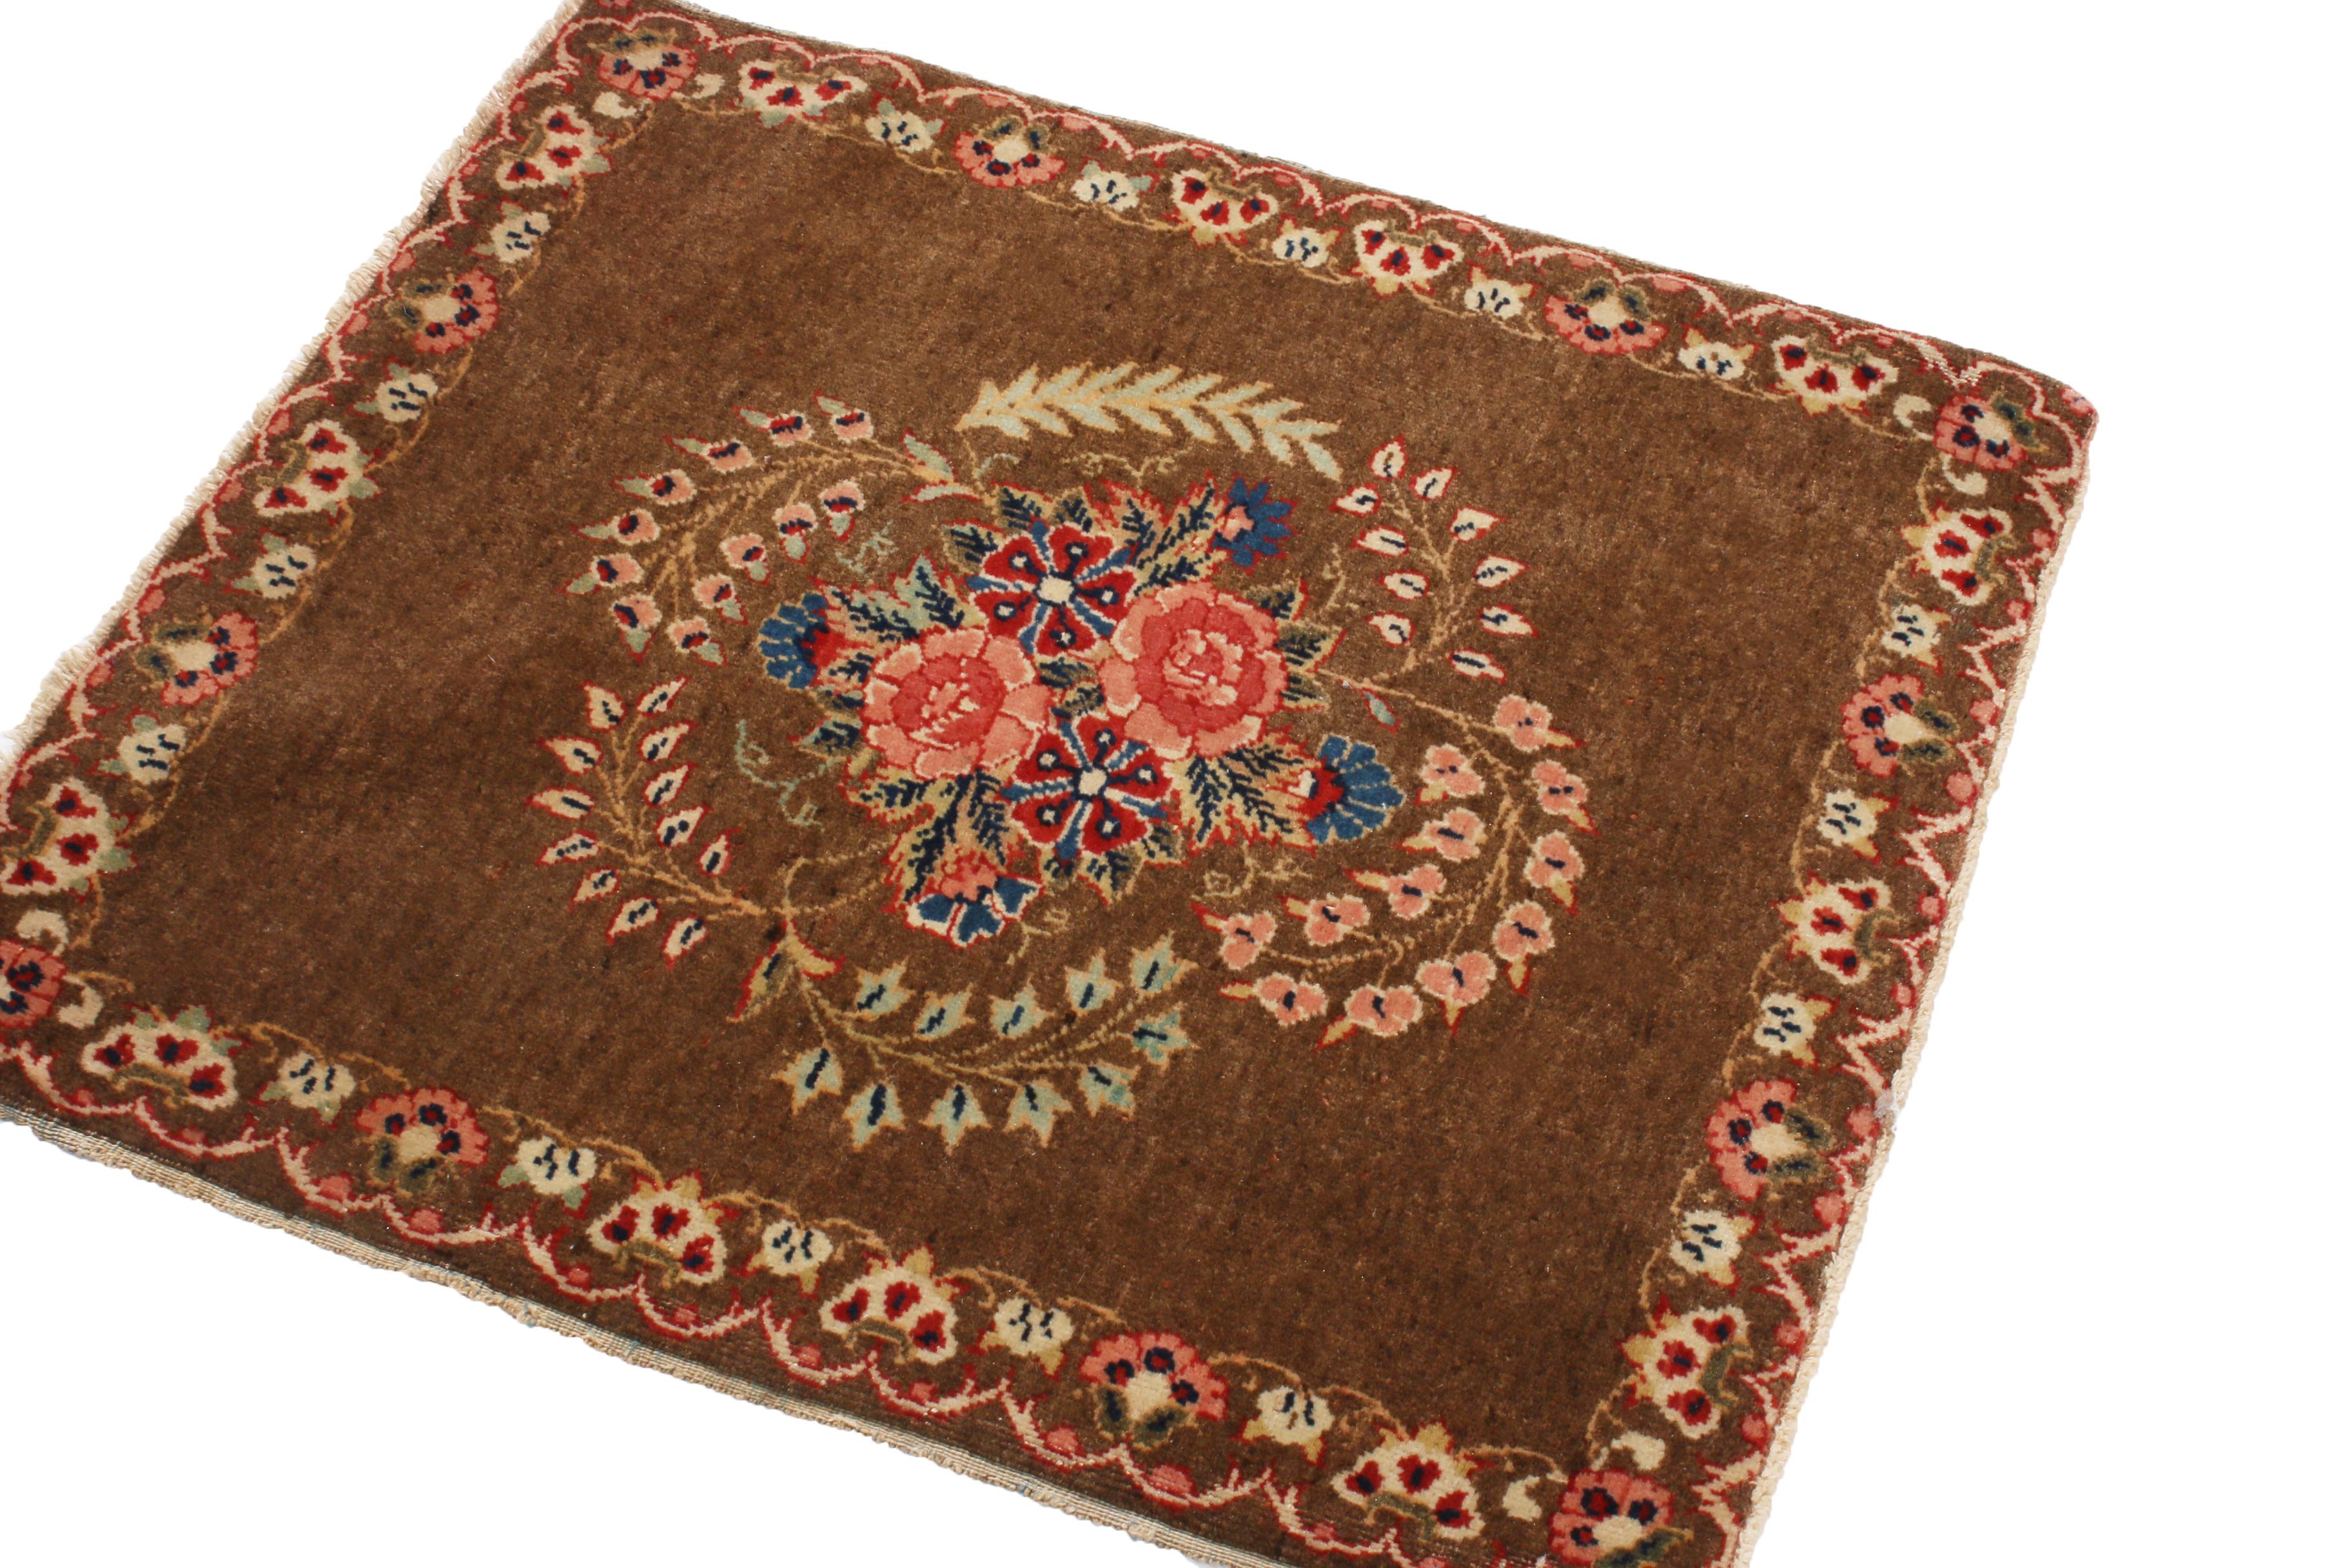 Originating from Persia in 1900, this hand-knotted wool antique Persian rug enjoys a distinguished classical combination of rich brown, vivid pink, and bright green colorways throughout an Abrash field, complemented by highly stylized carnation